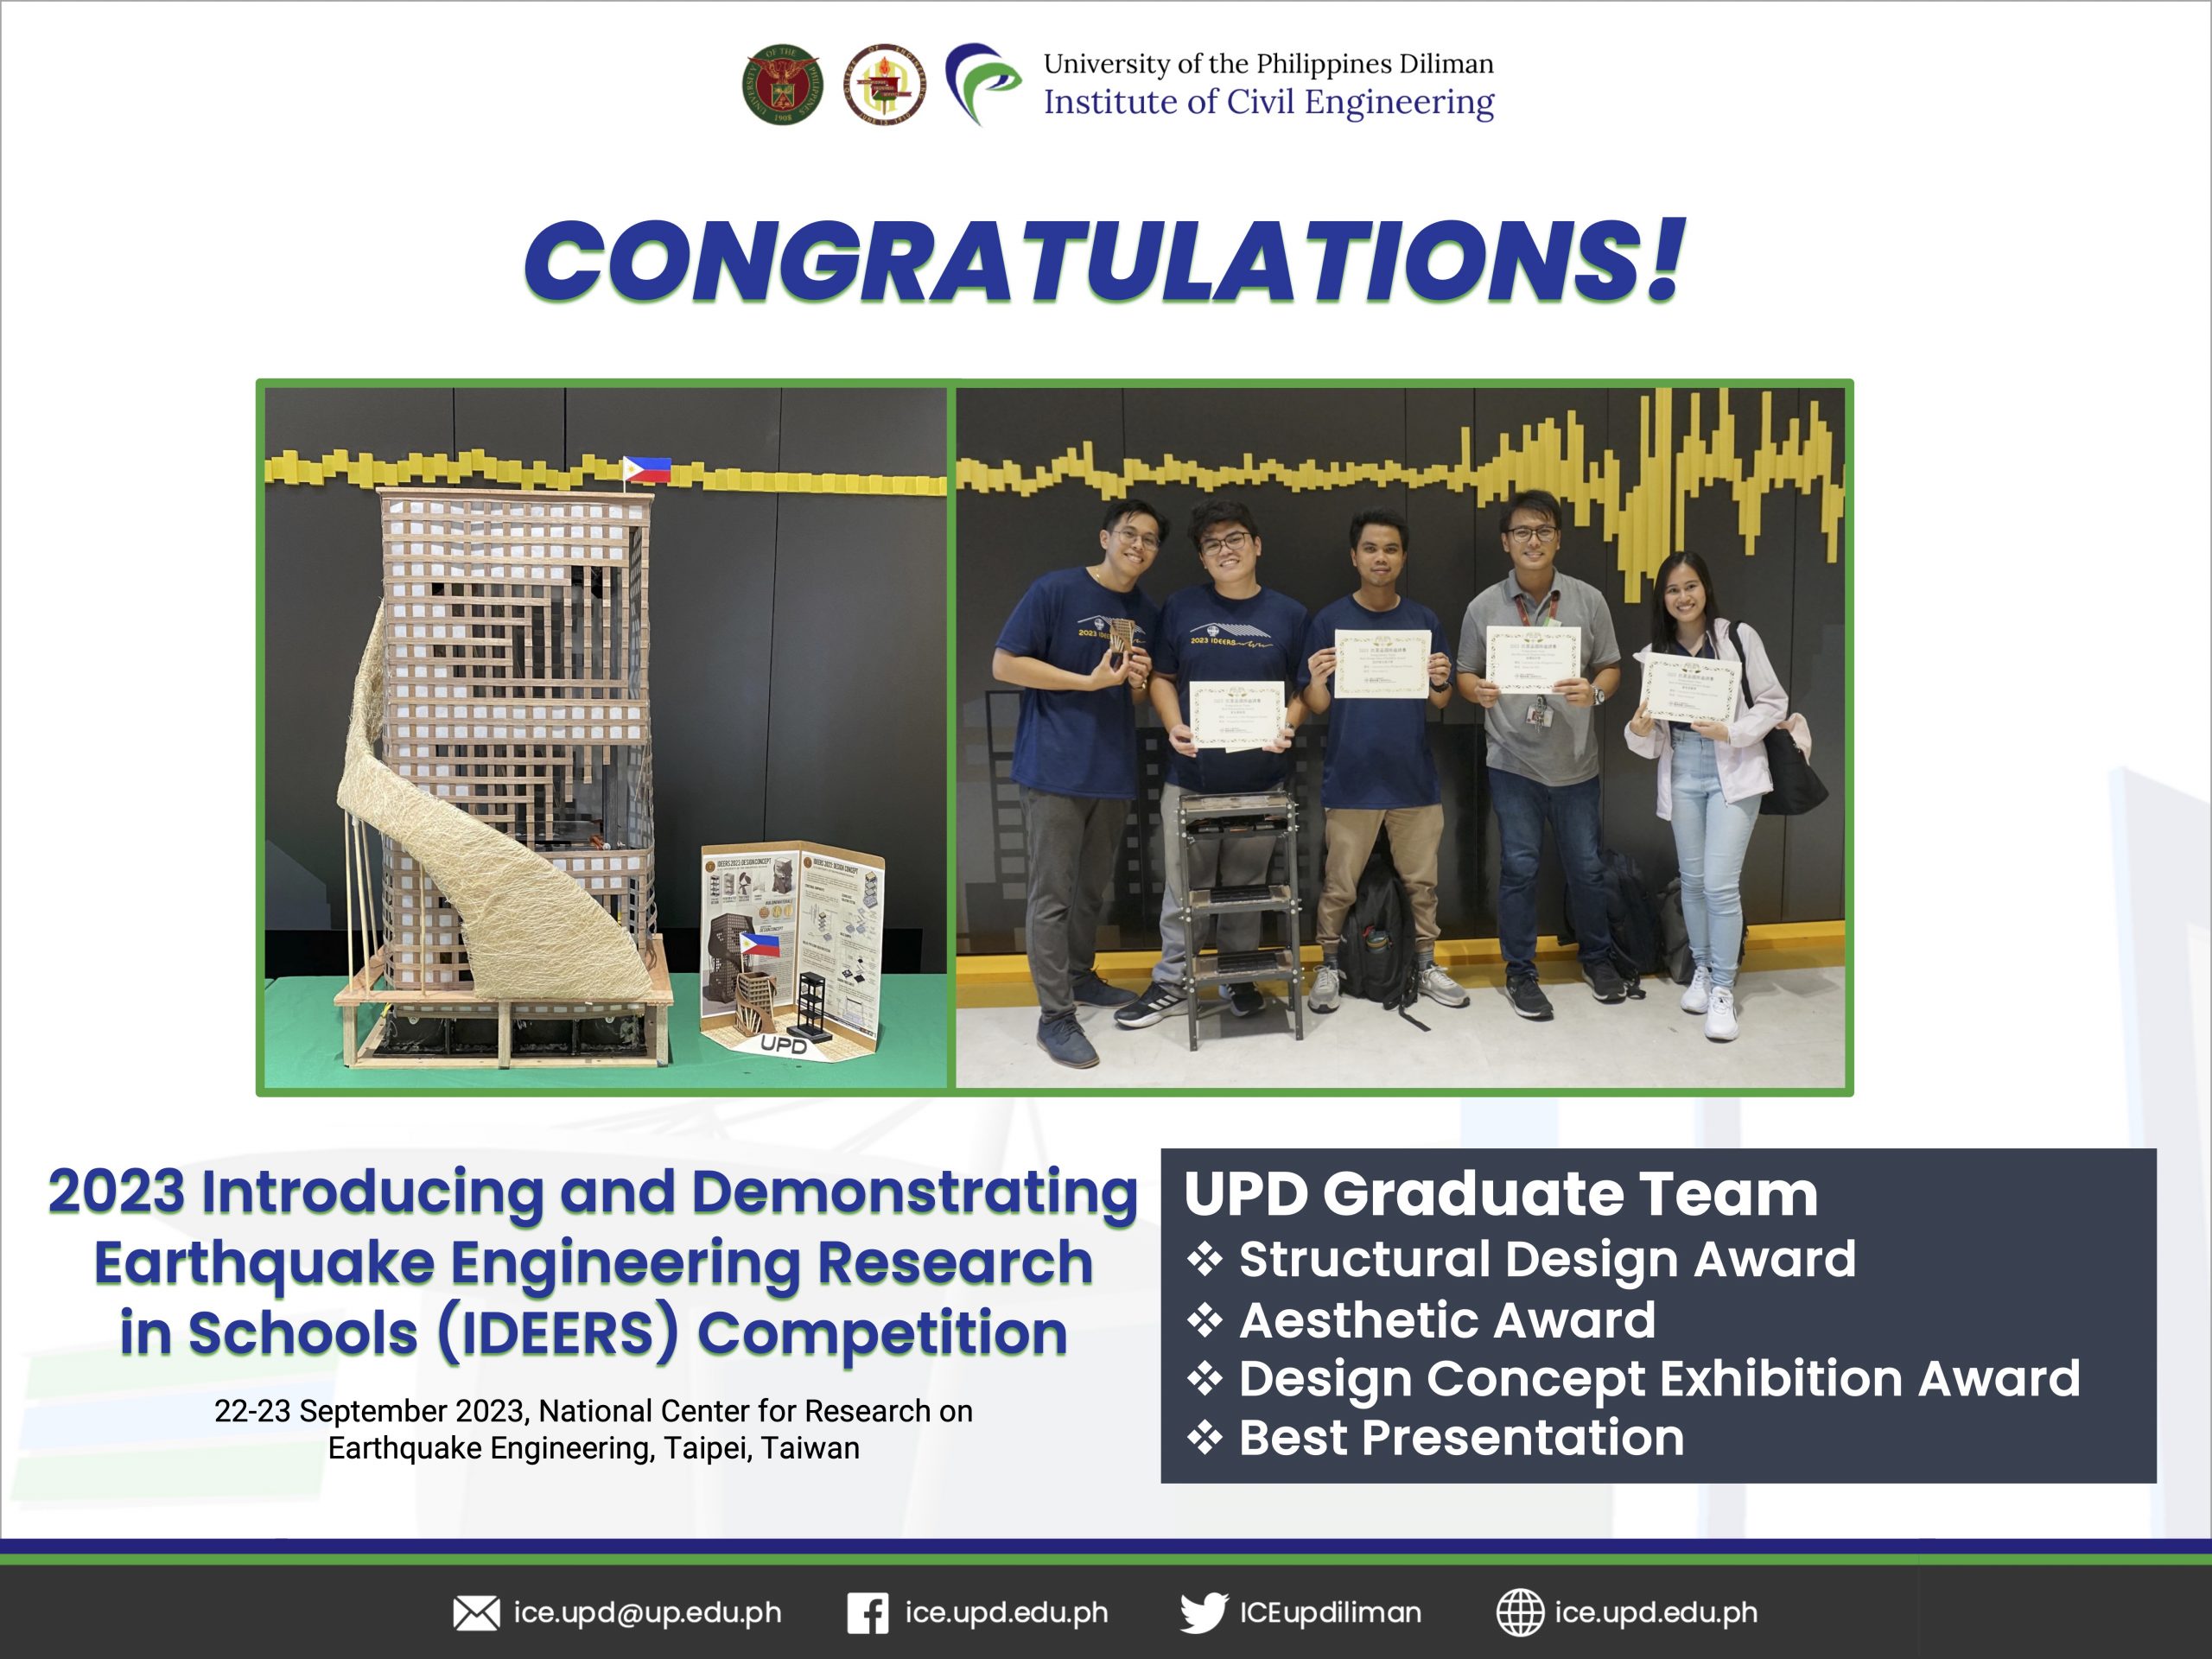 UPD Postgraduate team receives awards in IDEERS 2023 competition